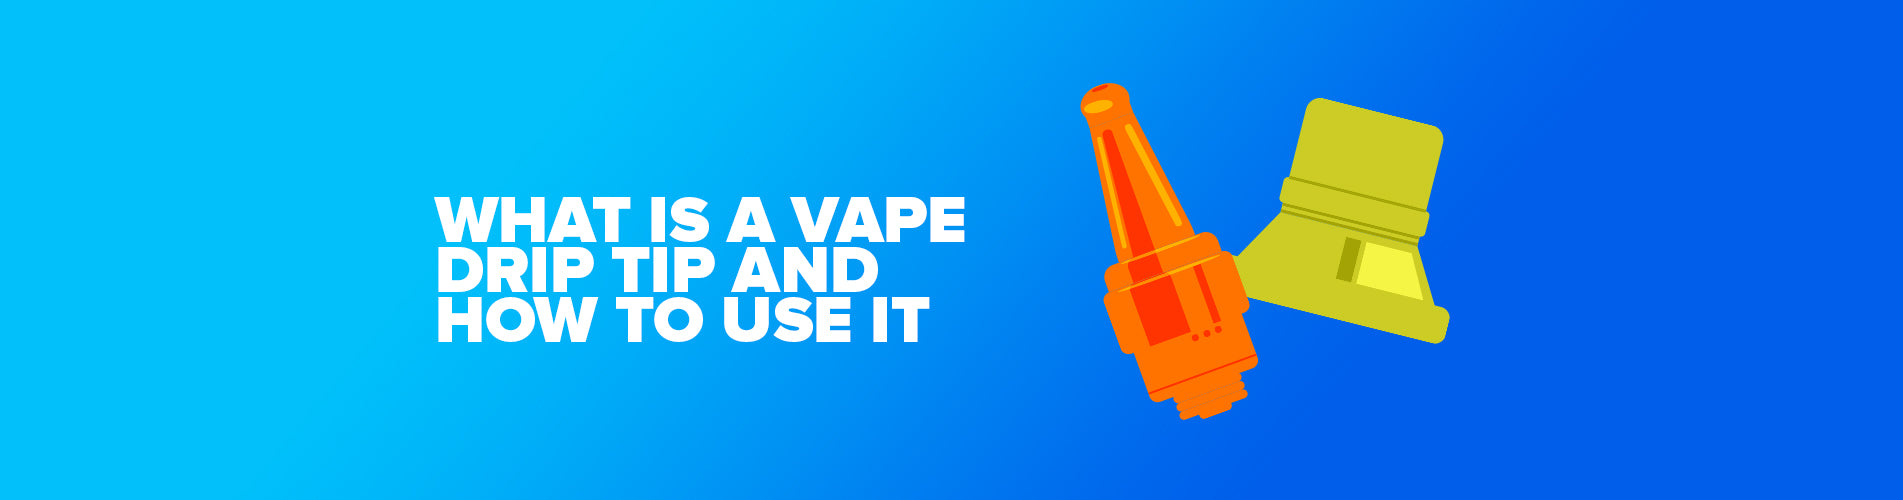 What Is A Vape Drip Tip And How To Use It?